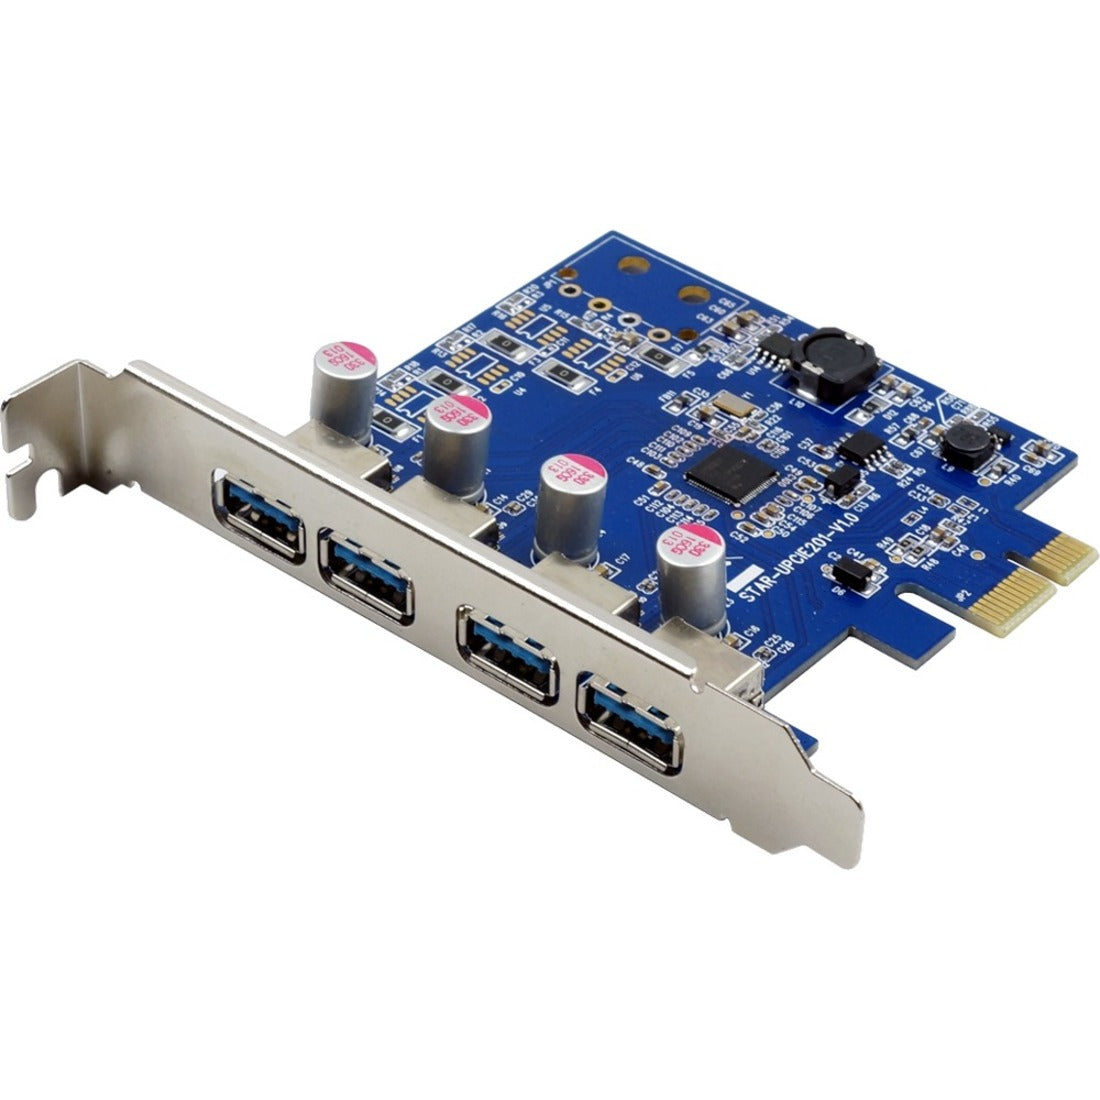 VisionTek 900870 Four Port USB 3.0 x1 PCIe Internal Card for PCs and Servers, Plug-in Card